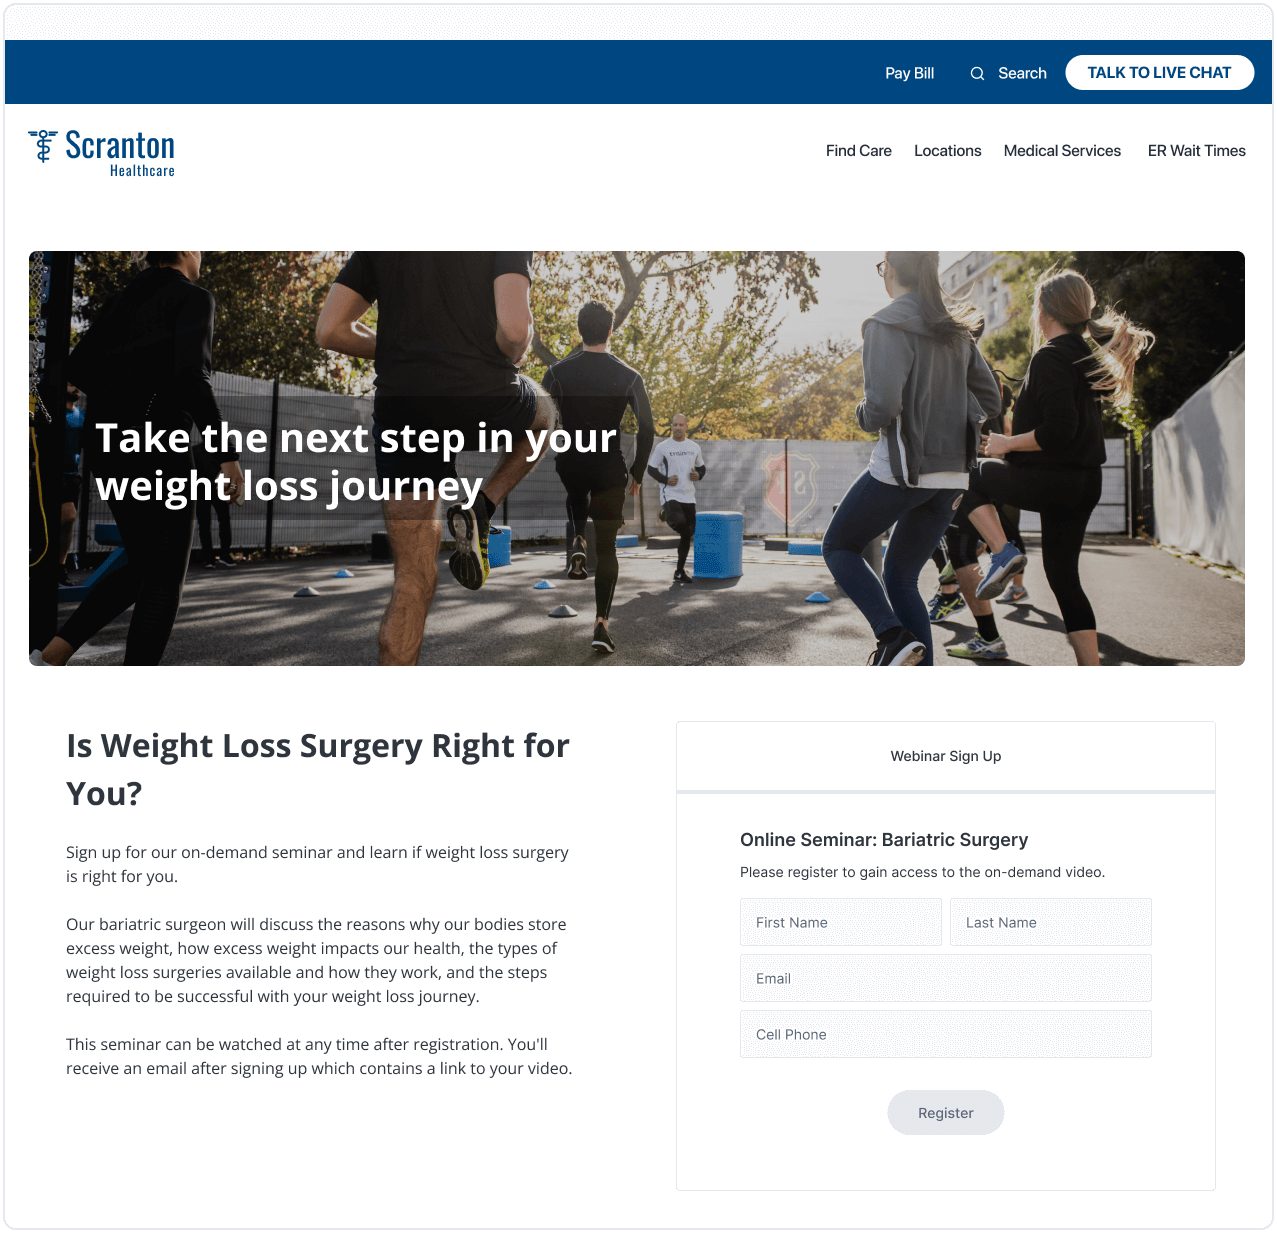 A landing page showing a weight loss surgery Webinar sign up form